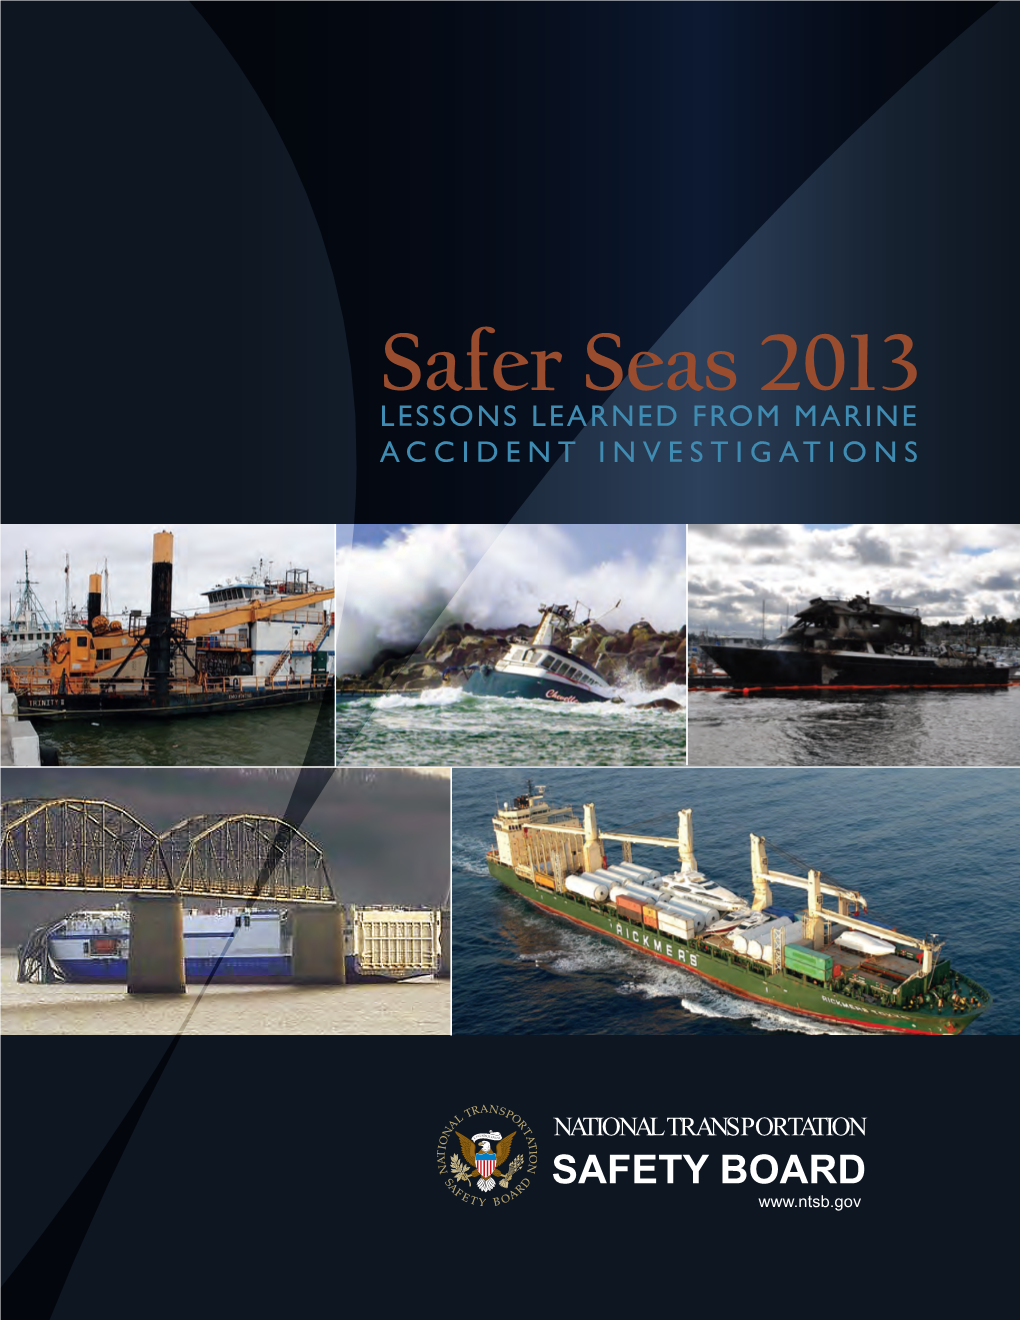 Ntsb-Safer-Seas-2013---Lessons-Learned-From-Marine-Accident-Investigations.Pdf